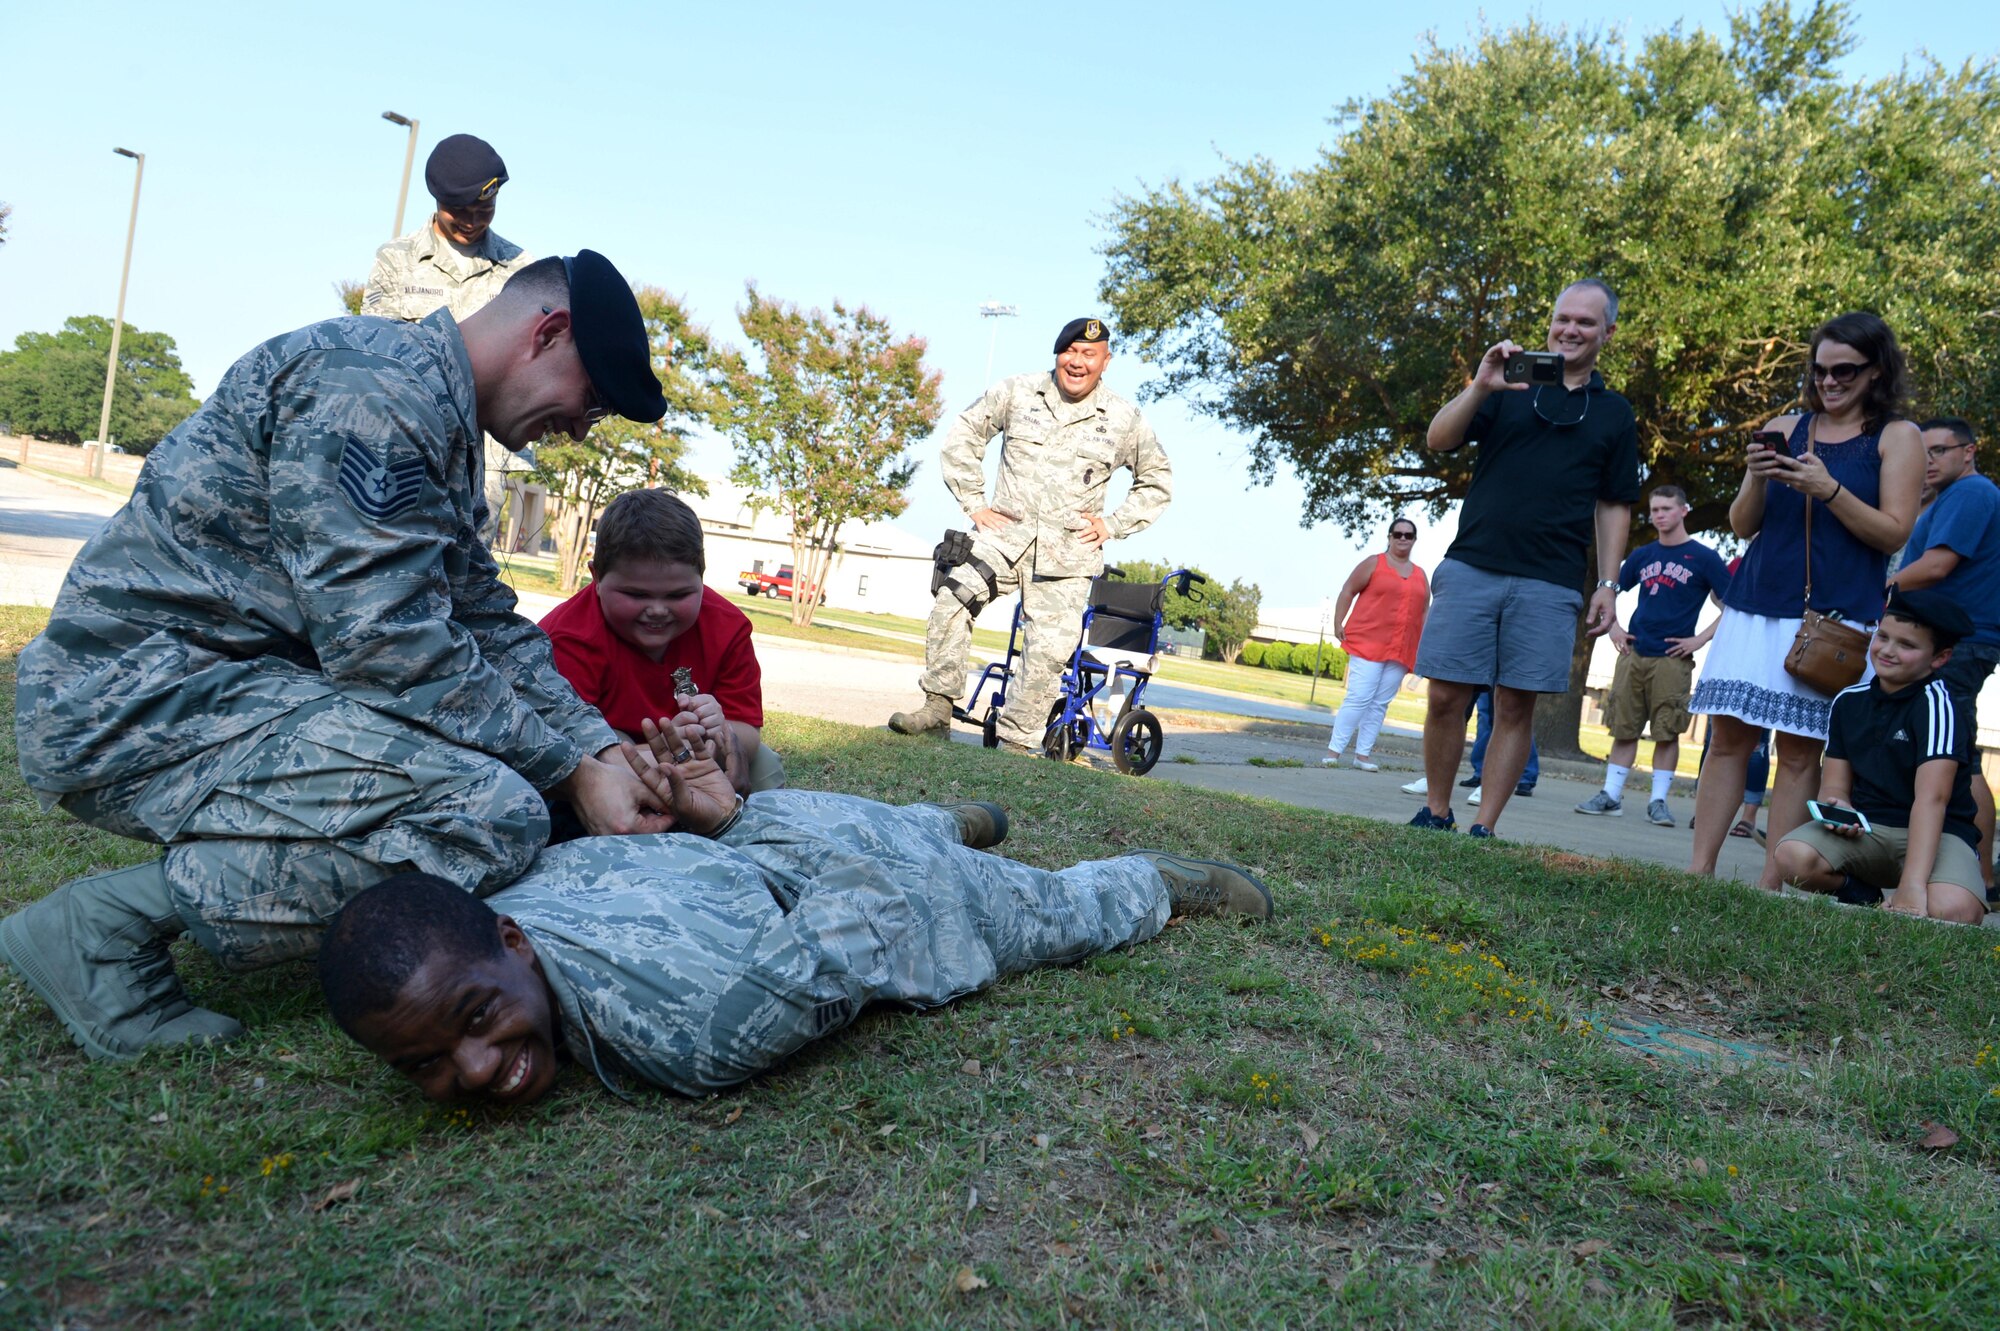 Jake Pritchard, 20th Security Forces Squadron honorary defender, apprehends a simulated “suspect” during a “Defender for a Day” event at Shaw Air Force Base, S.C., Sept. 9, 2016. Pritchard, who has Duchenne muscular dystrophy, received the opportunity to serve alongside 20th SFS Airmen, as well as learn how to properly apprehend a suspect. (U.S. Air Force photo by Airman 1st Class Christopher Maldonado)